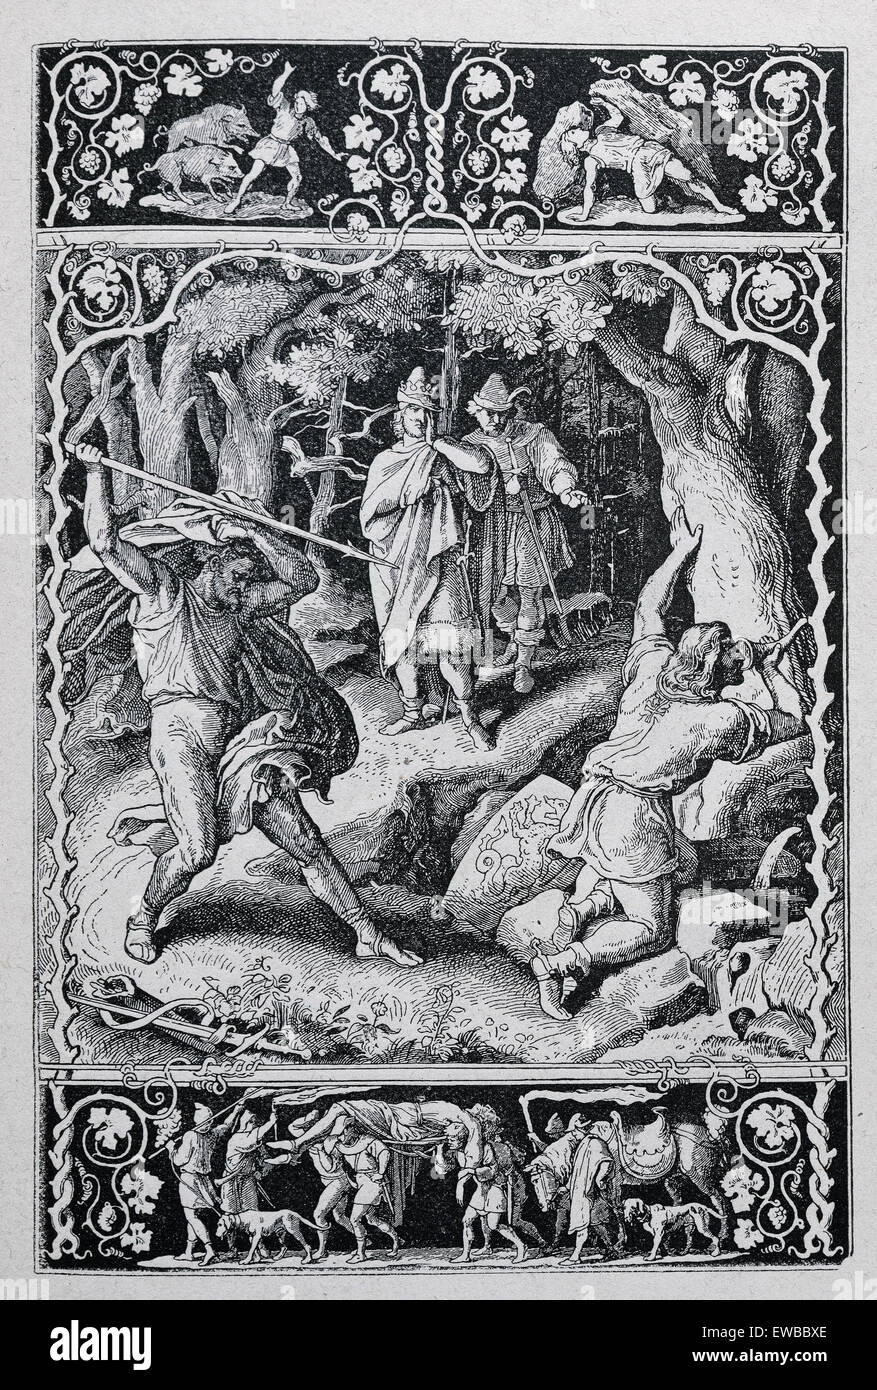 Nibelungenlied. 13th century. Anonymous German epic poem based on the legends of Siegfried and the people of the Nibelungs. First part. Chant XVI. Siegfried killed by Hagen while hunting. Engraving, 19th century. Stock Photo